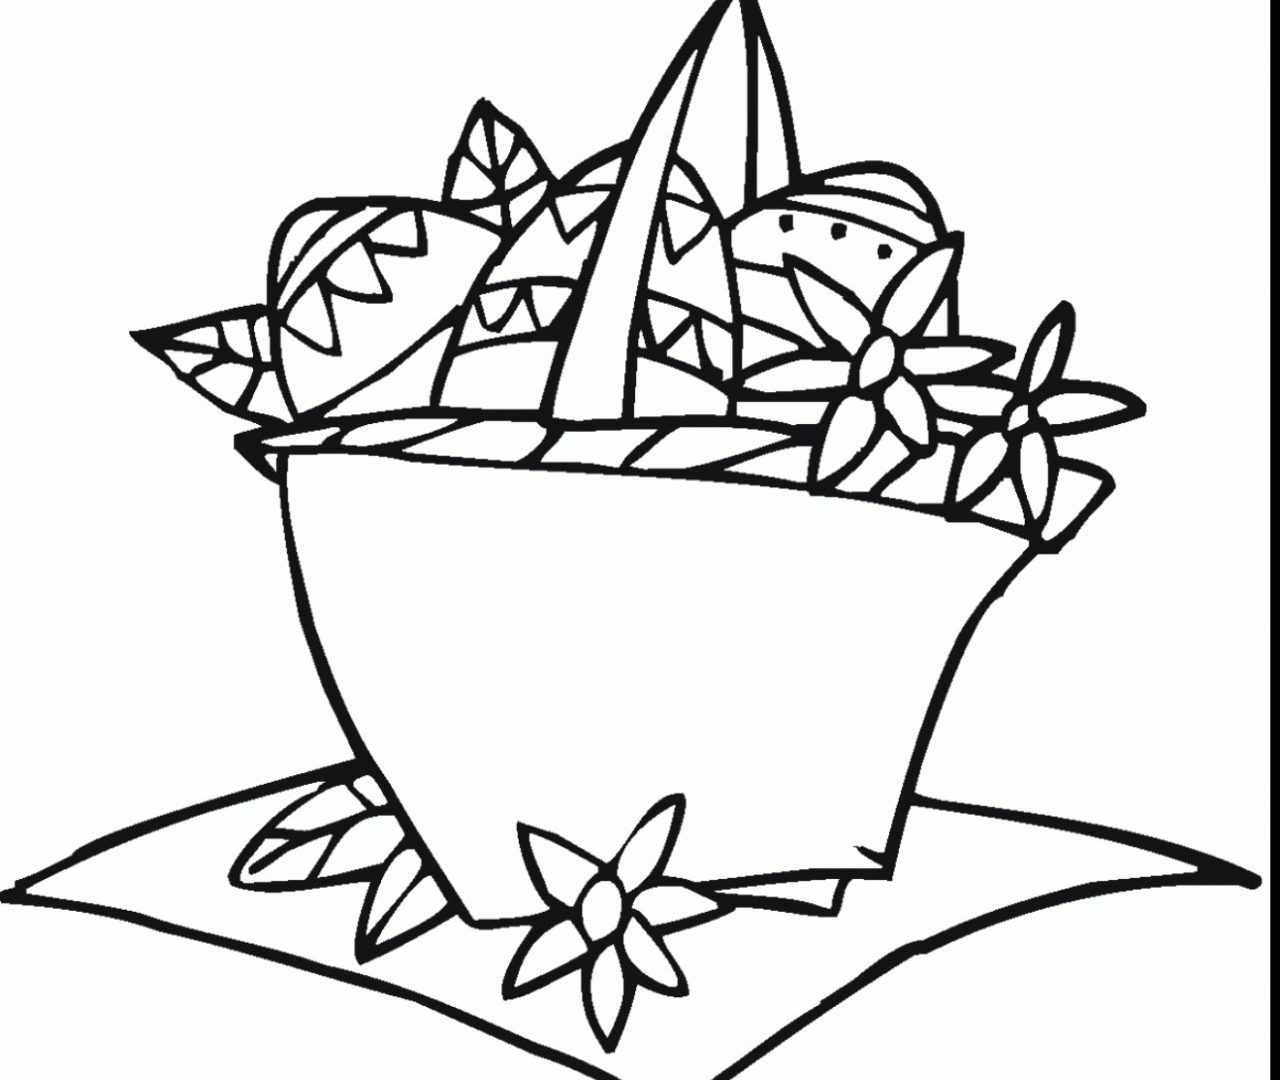 Create Your Own Coloring Page : Make Your Own Coloring Pages Online At